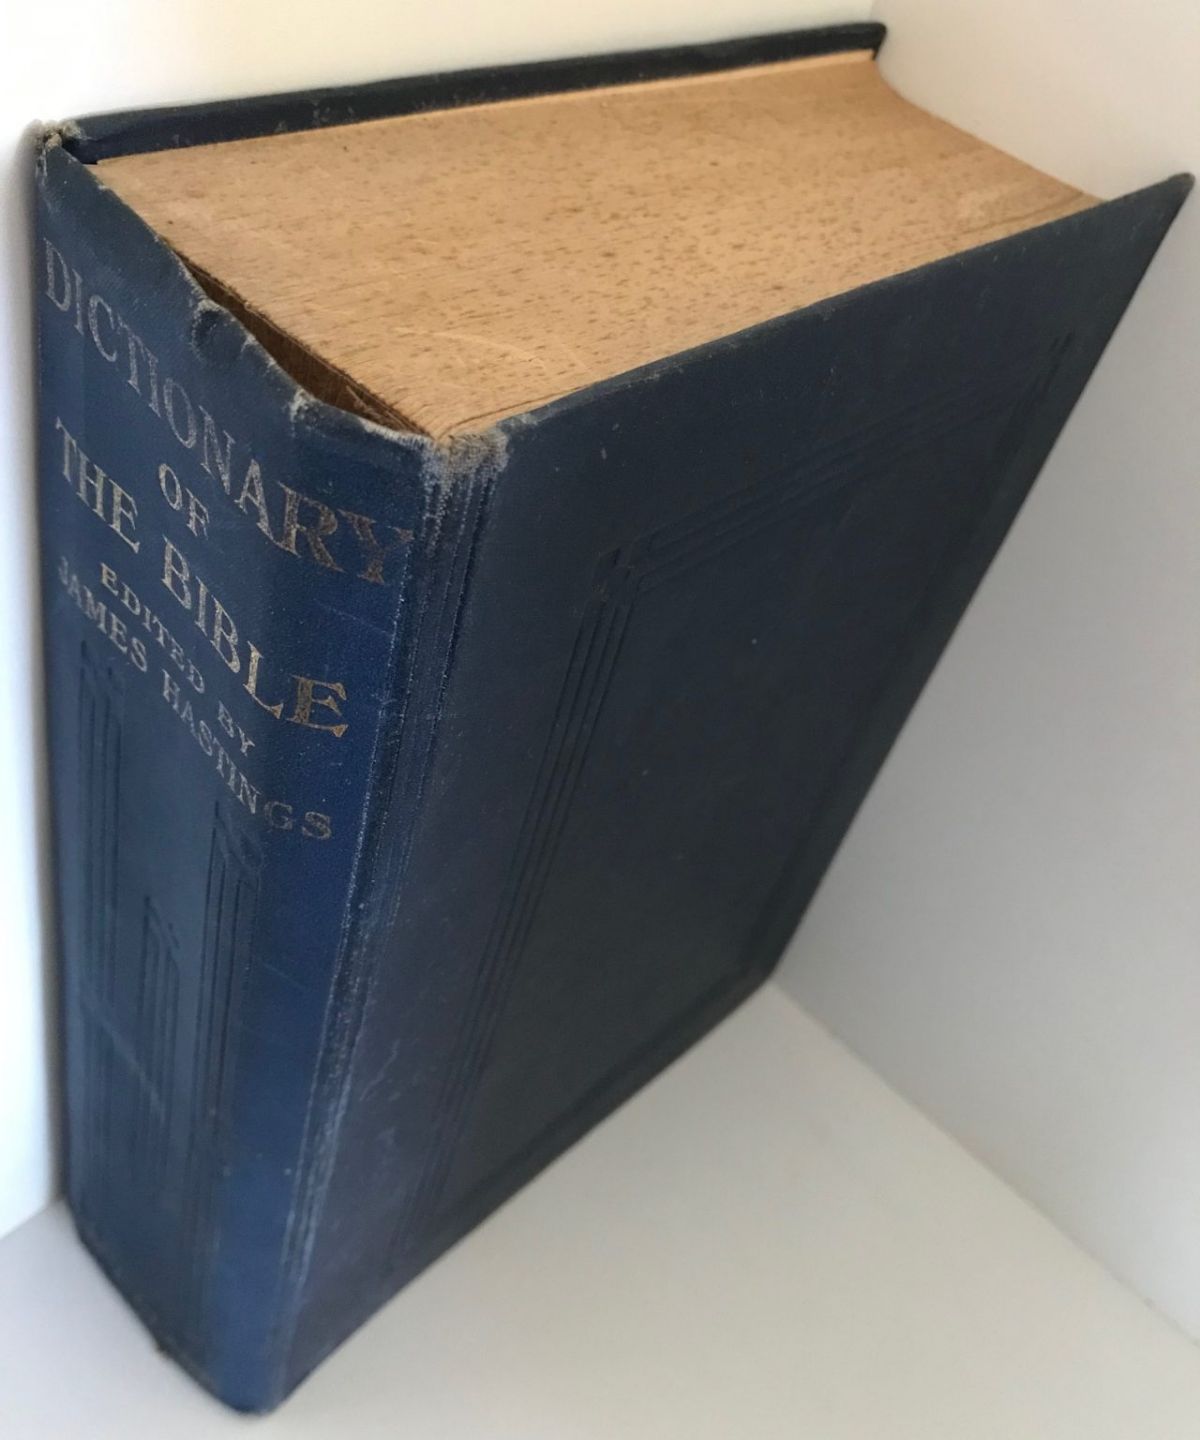 DICTIONARY OF THE BIBLE 1909